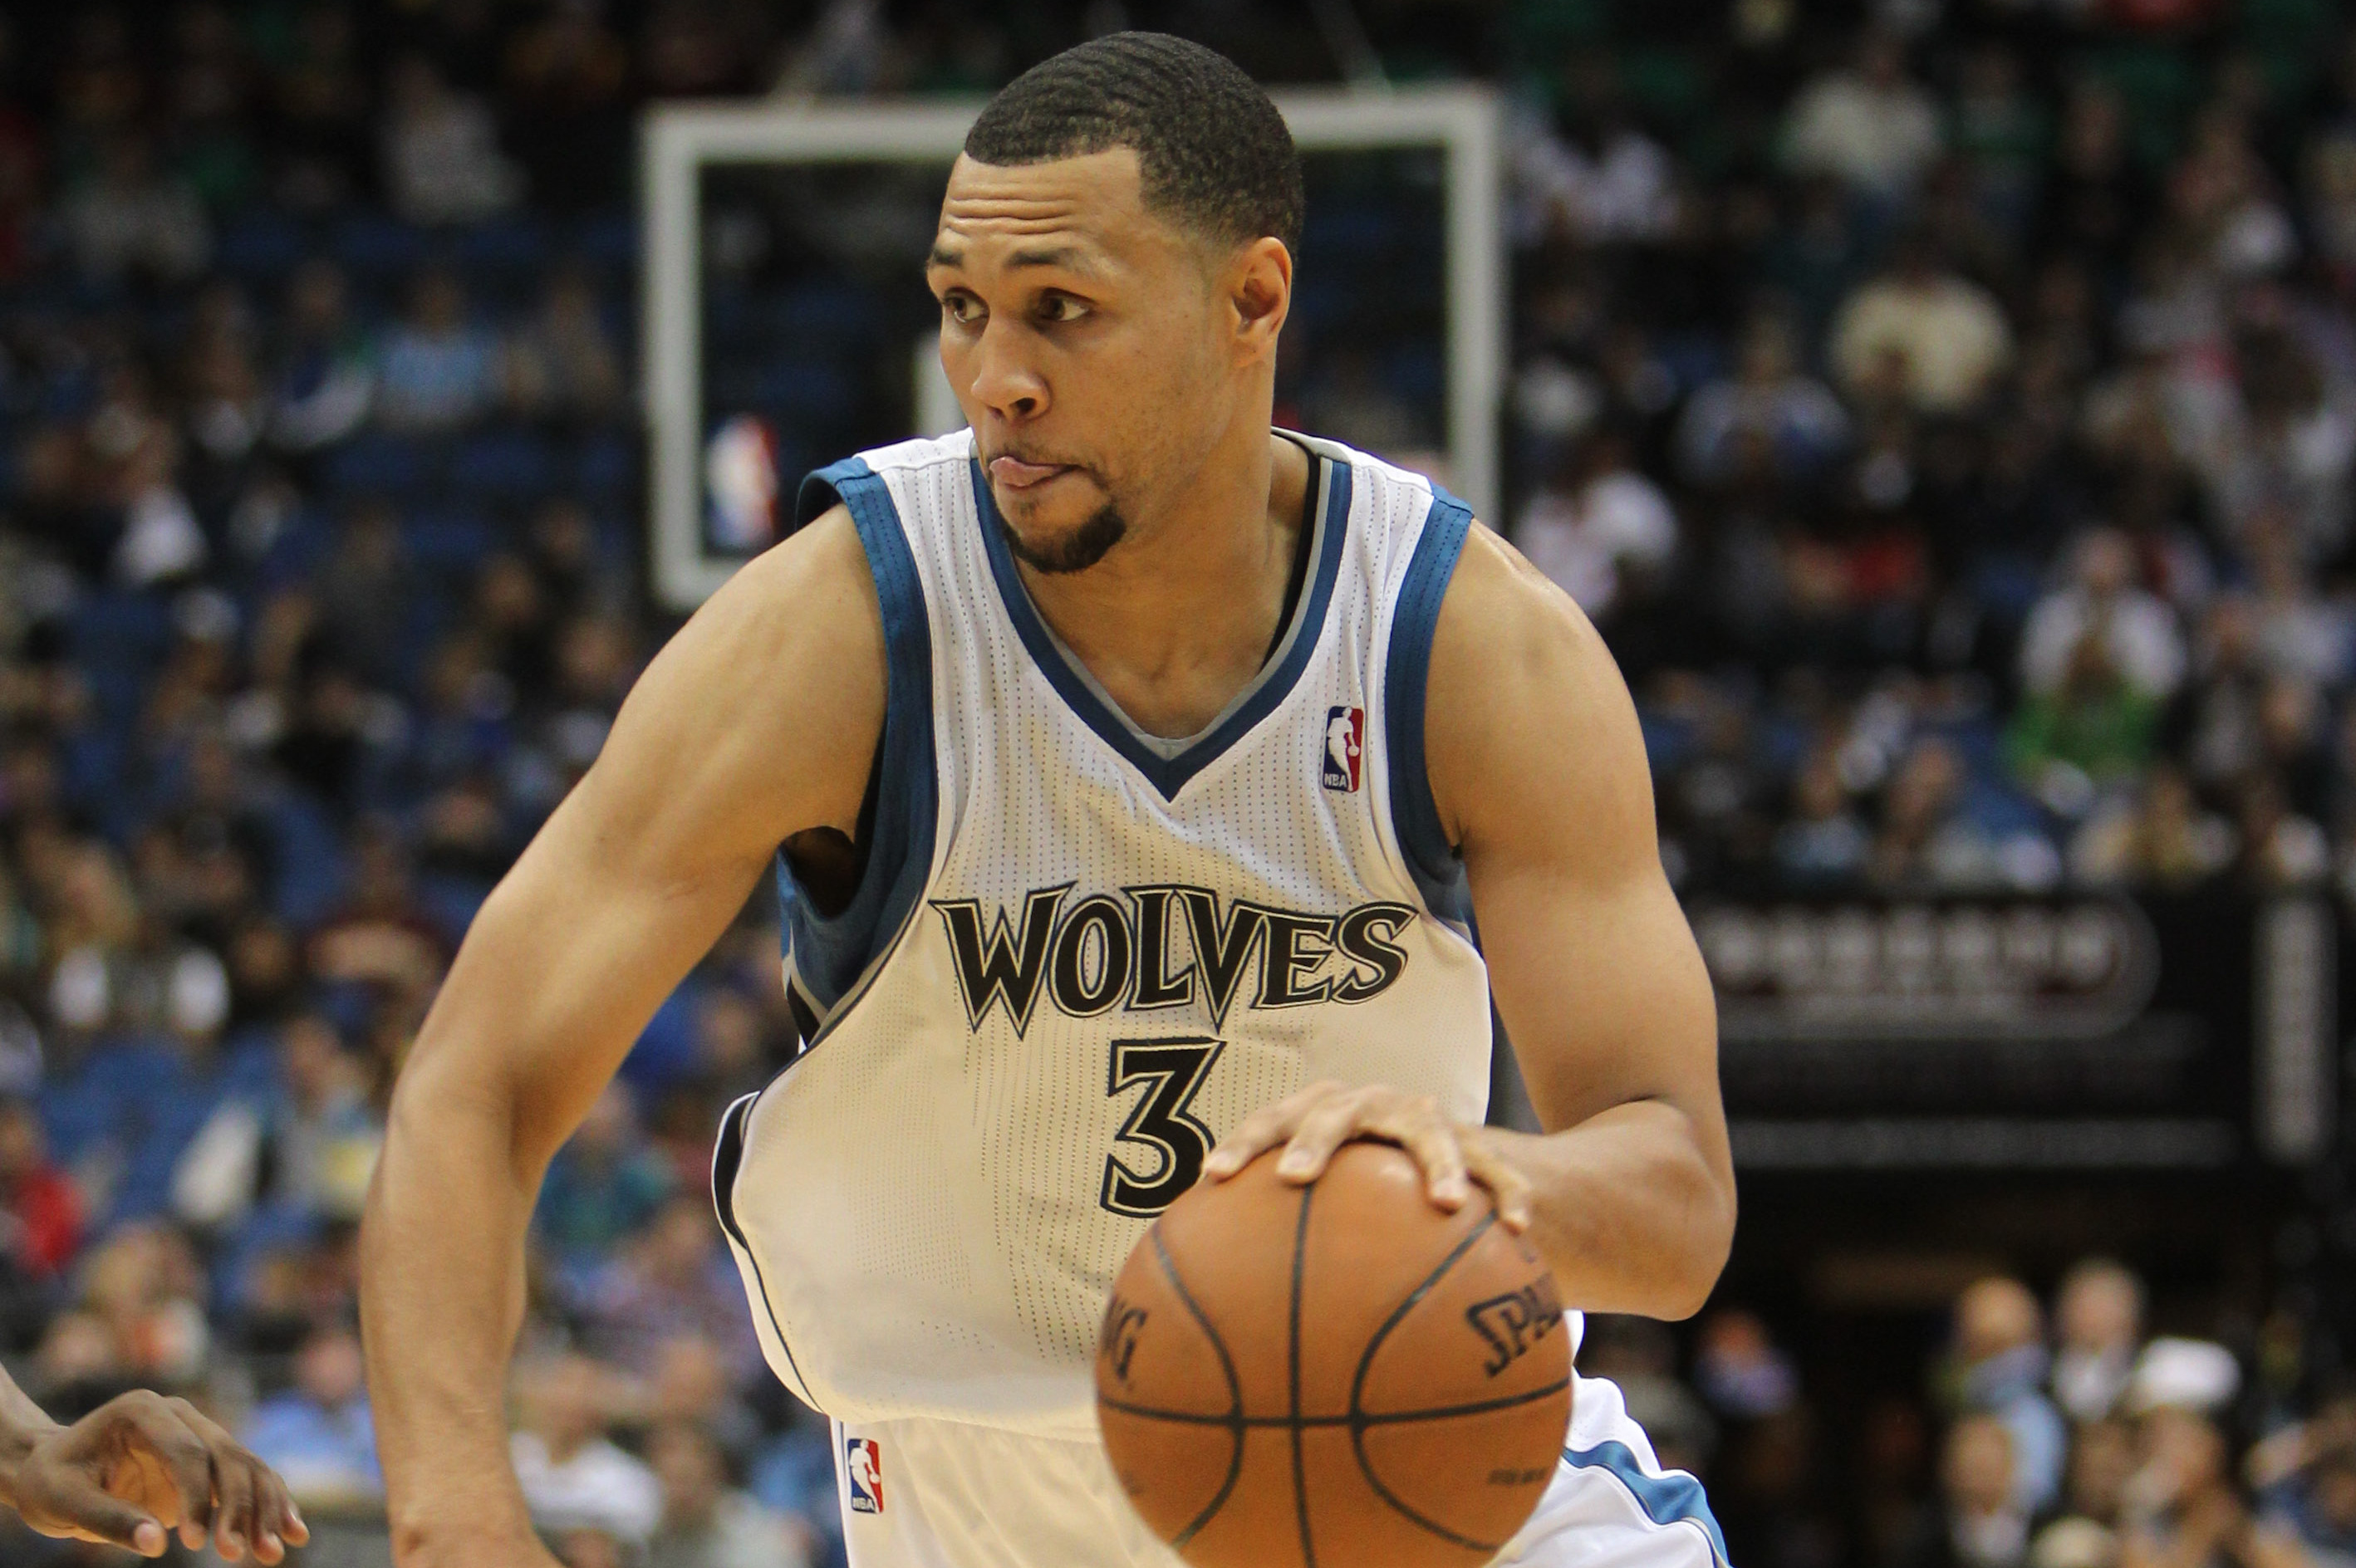 The Tragic Story of Brandon Roy - NBA Careers RUINED by Injuries